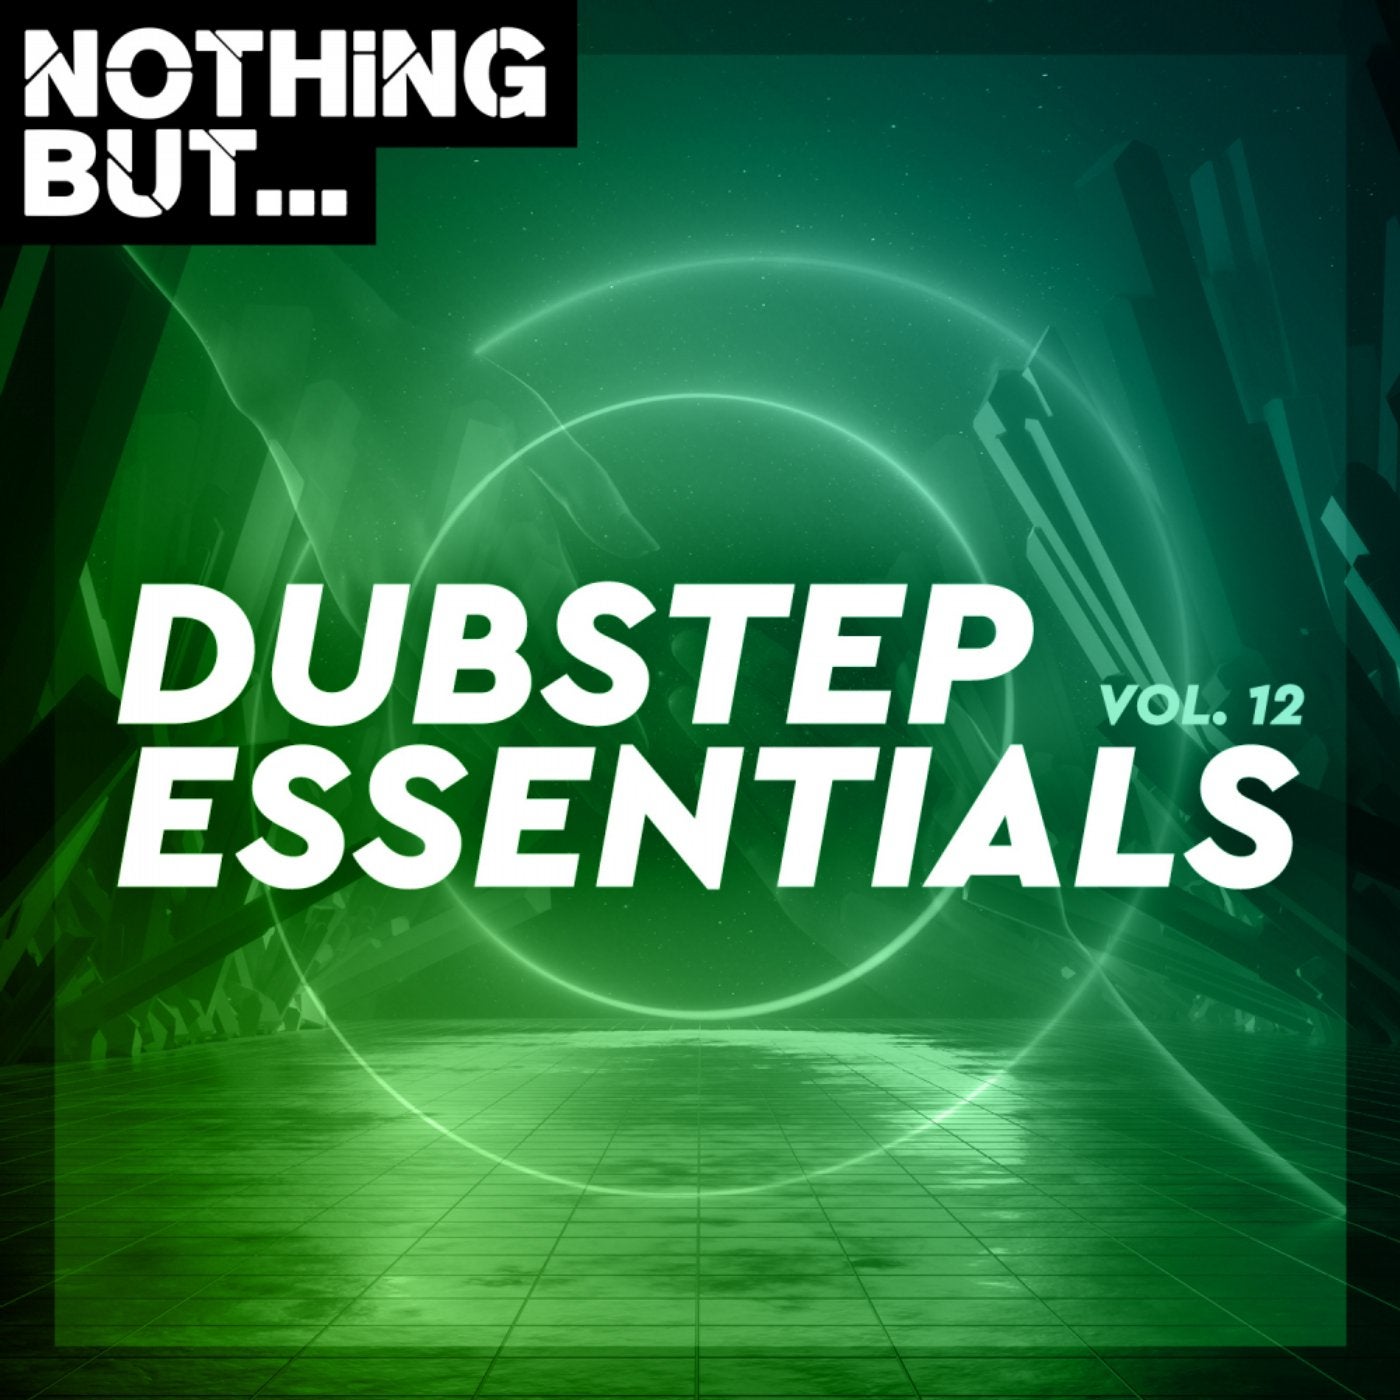 Nothing But... Dubstep Essentials, Vol. 12